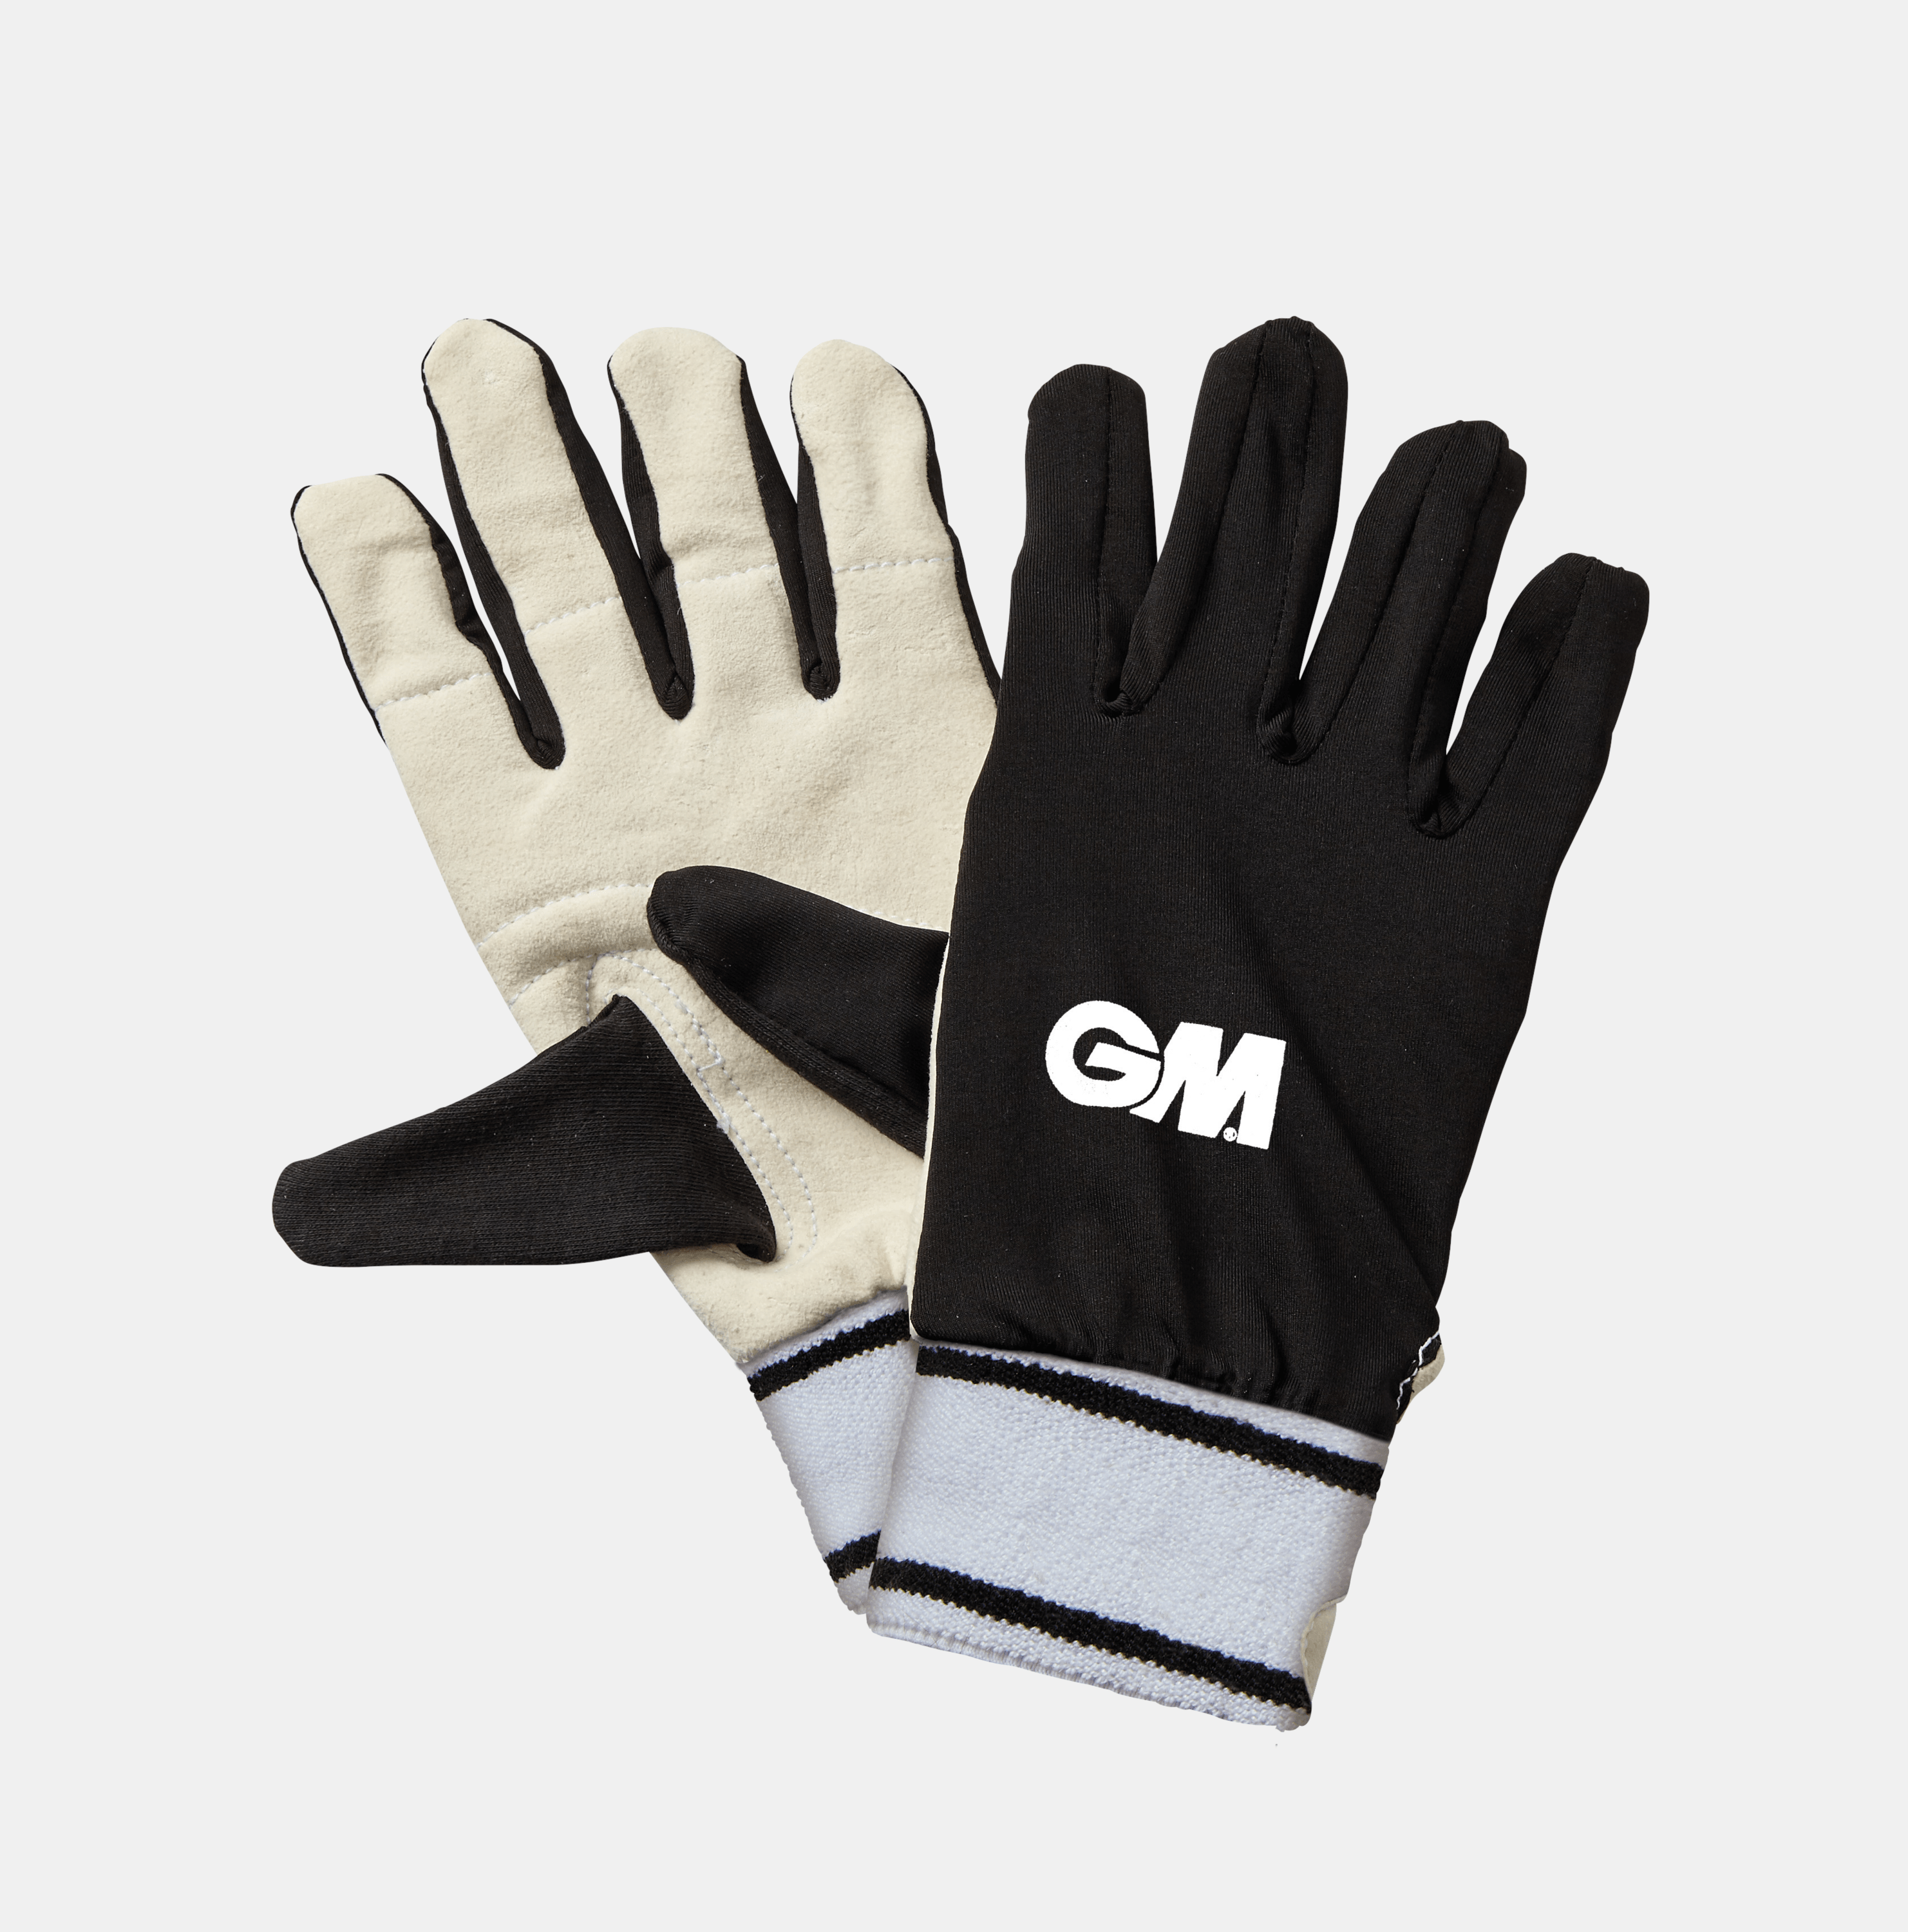 GM Chamois Palm INNER Wicket Keeping Gloves - ADULT - AT Sports